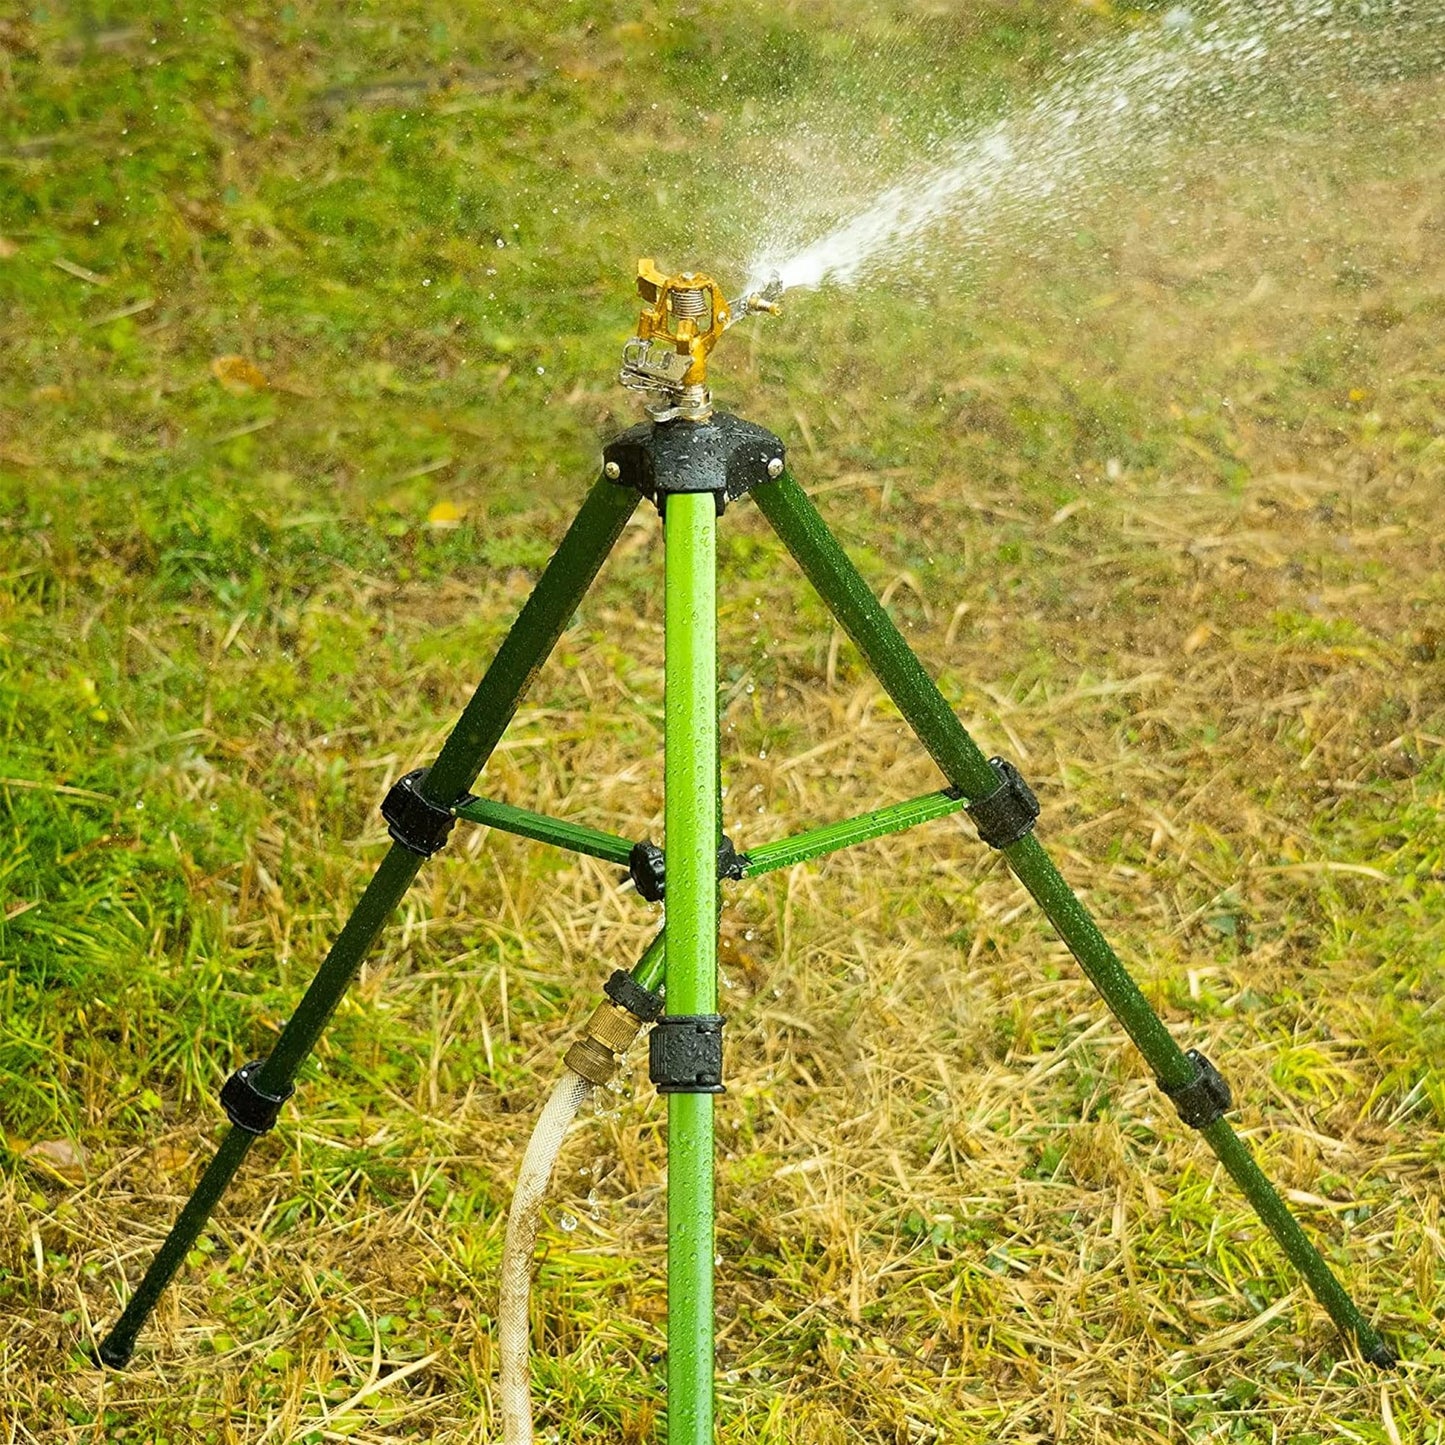 Hourleey 1Pack Extra Tall,Extends Up to 50 Inch, Heavy Duty Tripod Sprinklers with Brass Sprinkler Head, 360 Degree Large Area Coverage, 3/4 Inch Connector Sprinkler for Yard Lawn Garden